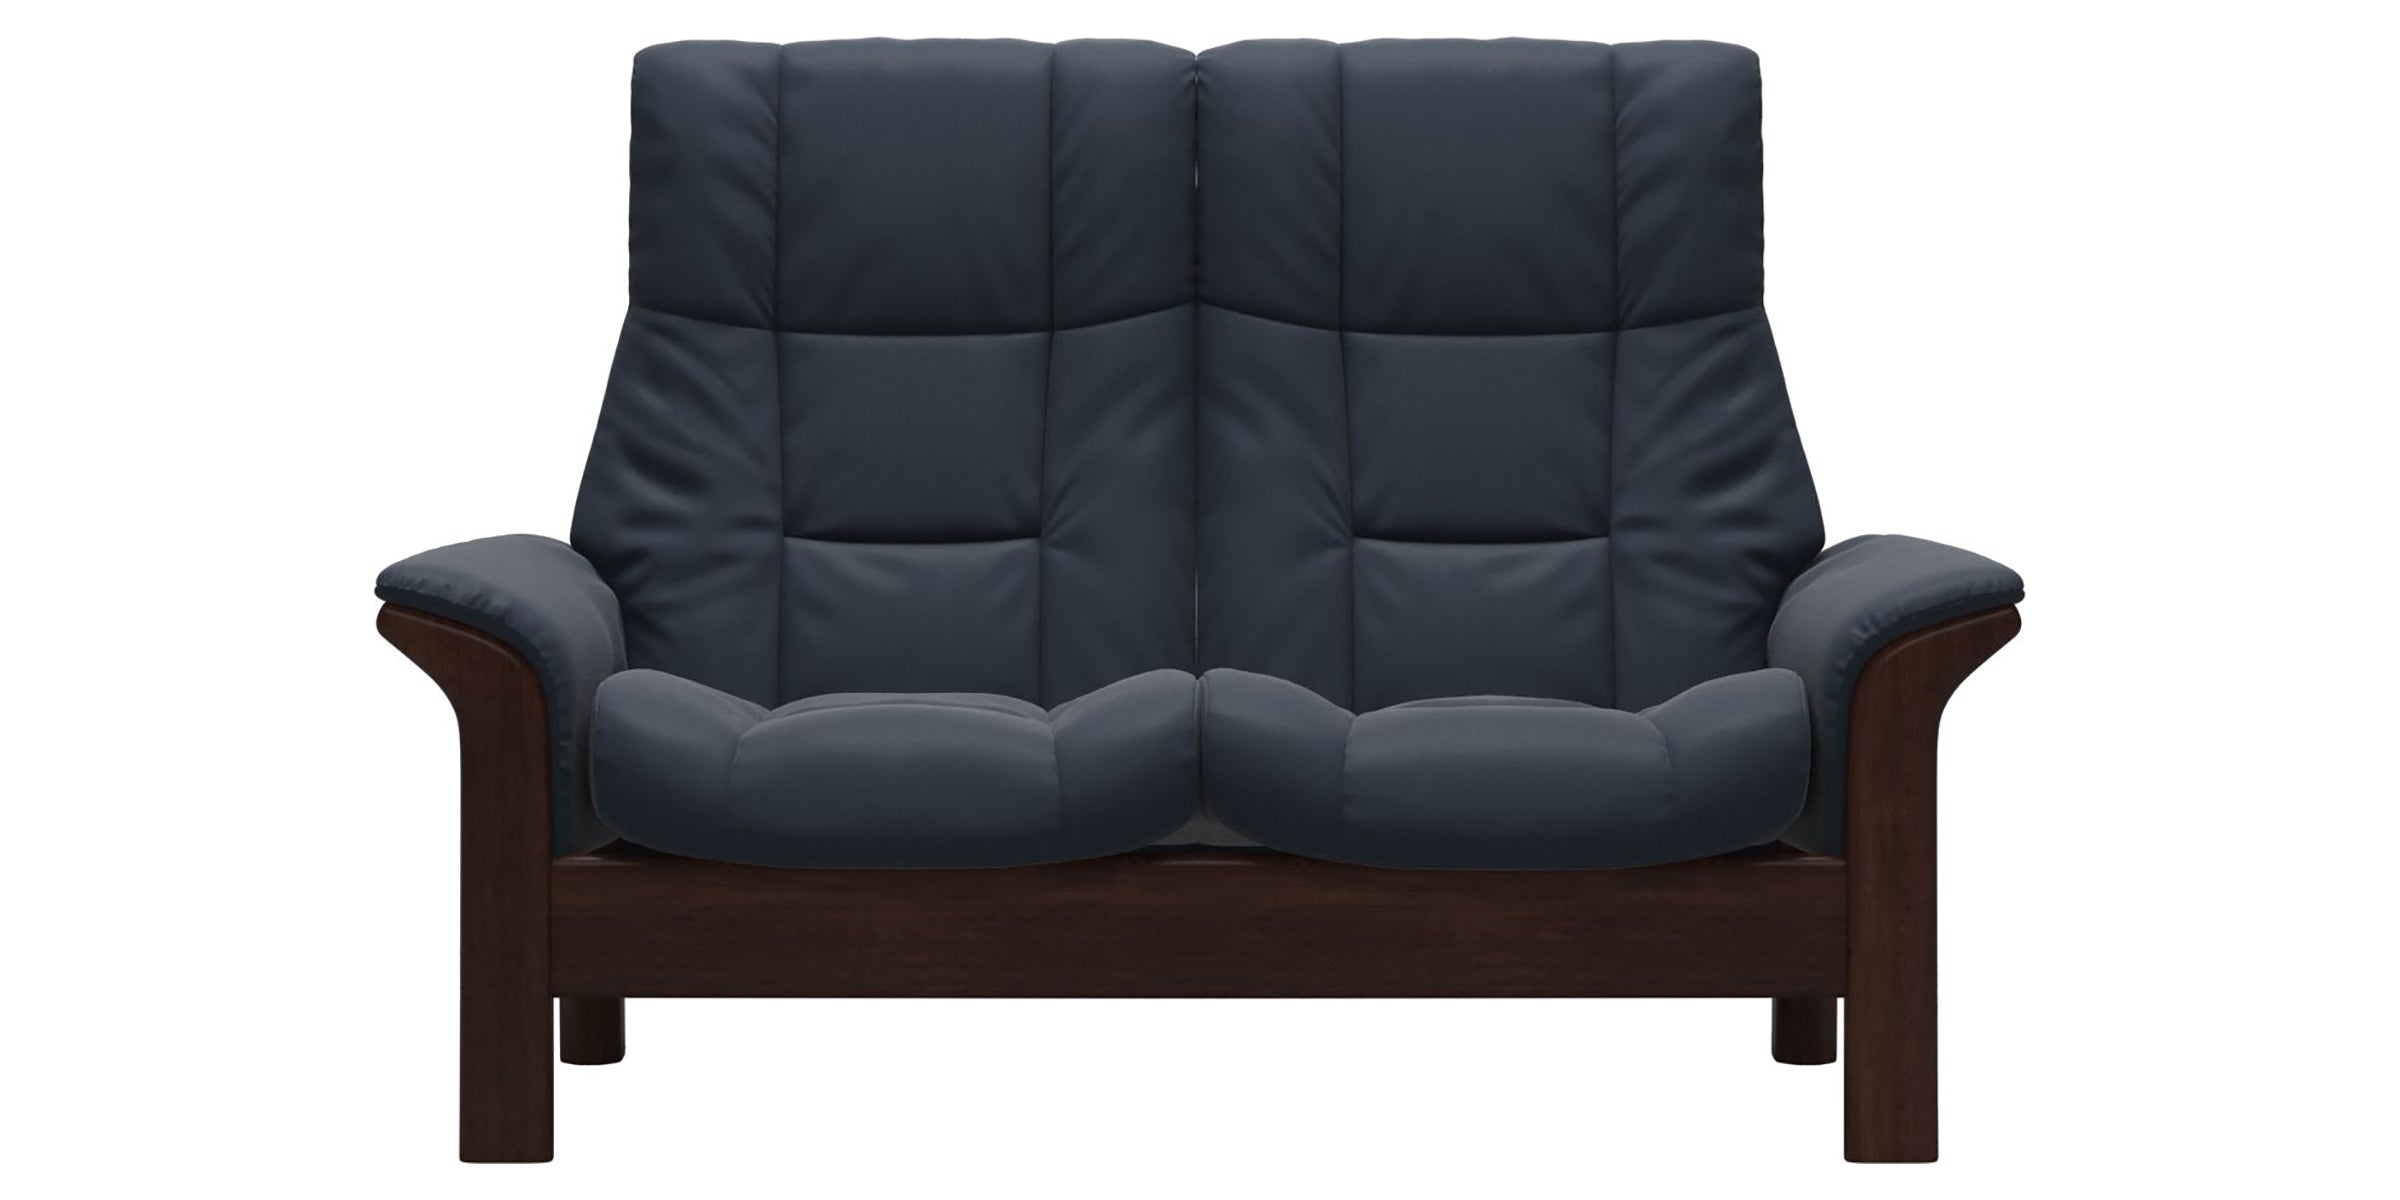 Paloma Leather Oxford Blue and Brown Base | Stressless Windsor 2-Seater High Back Sofa | Valley Ridge Furniture